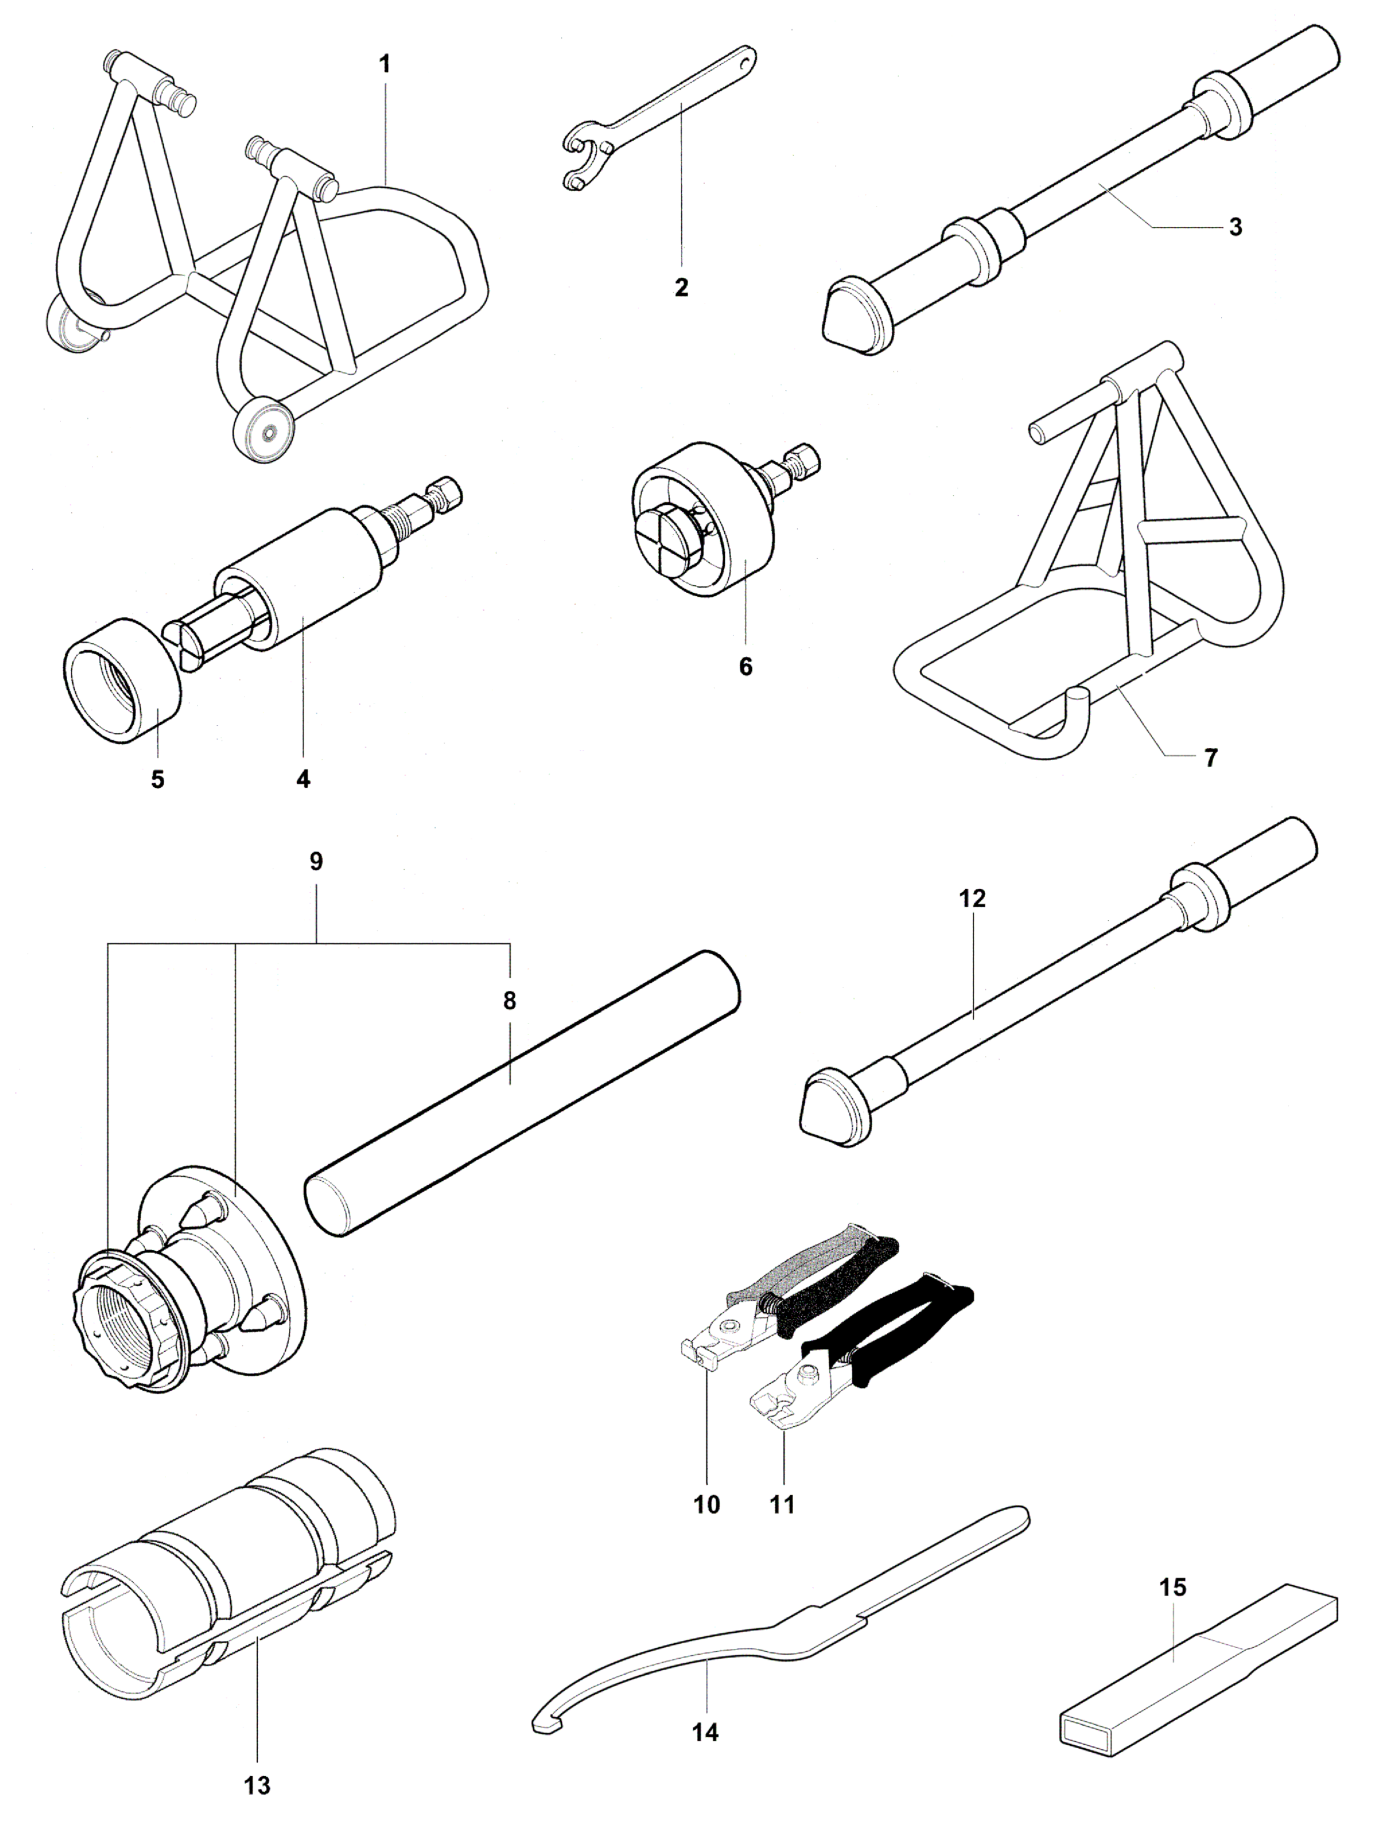 Service Tools Frame 1


